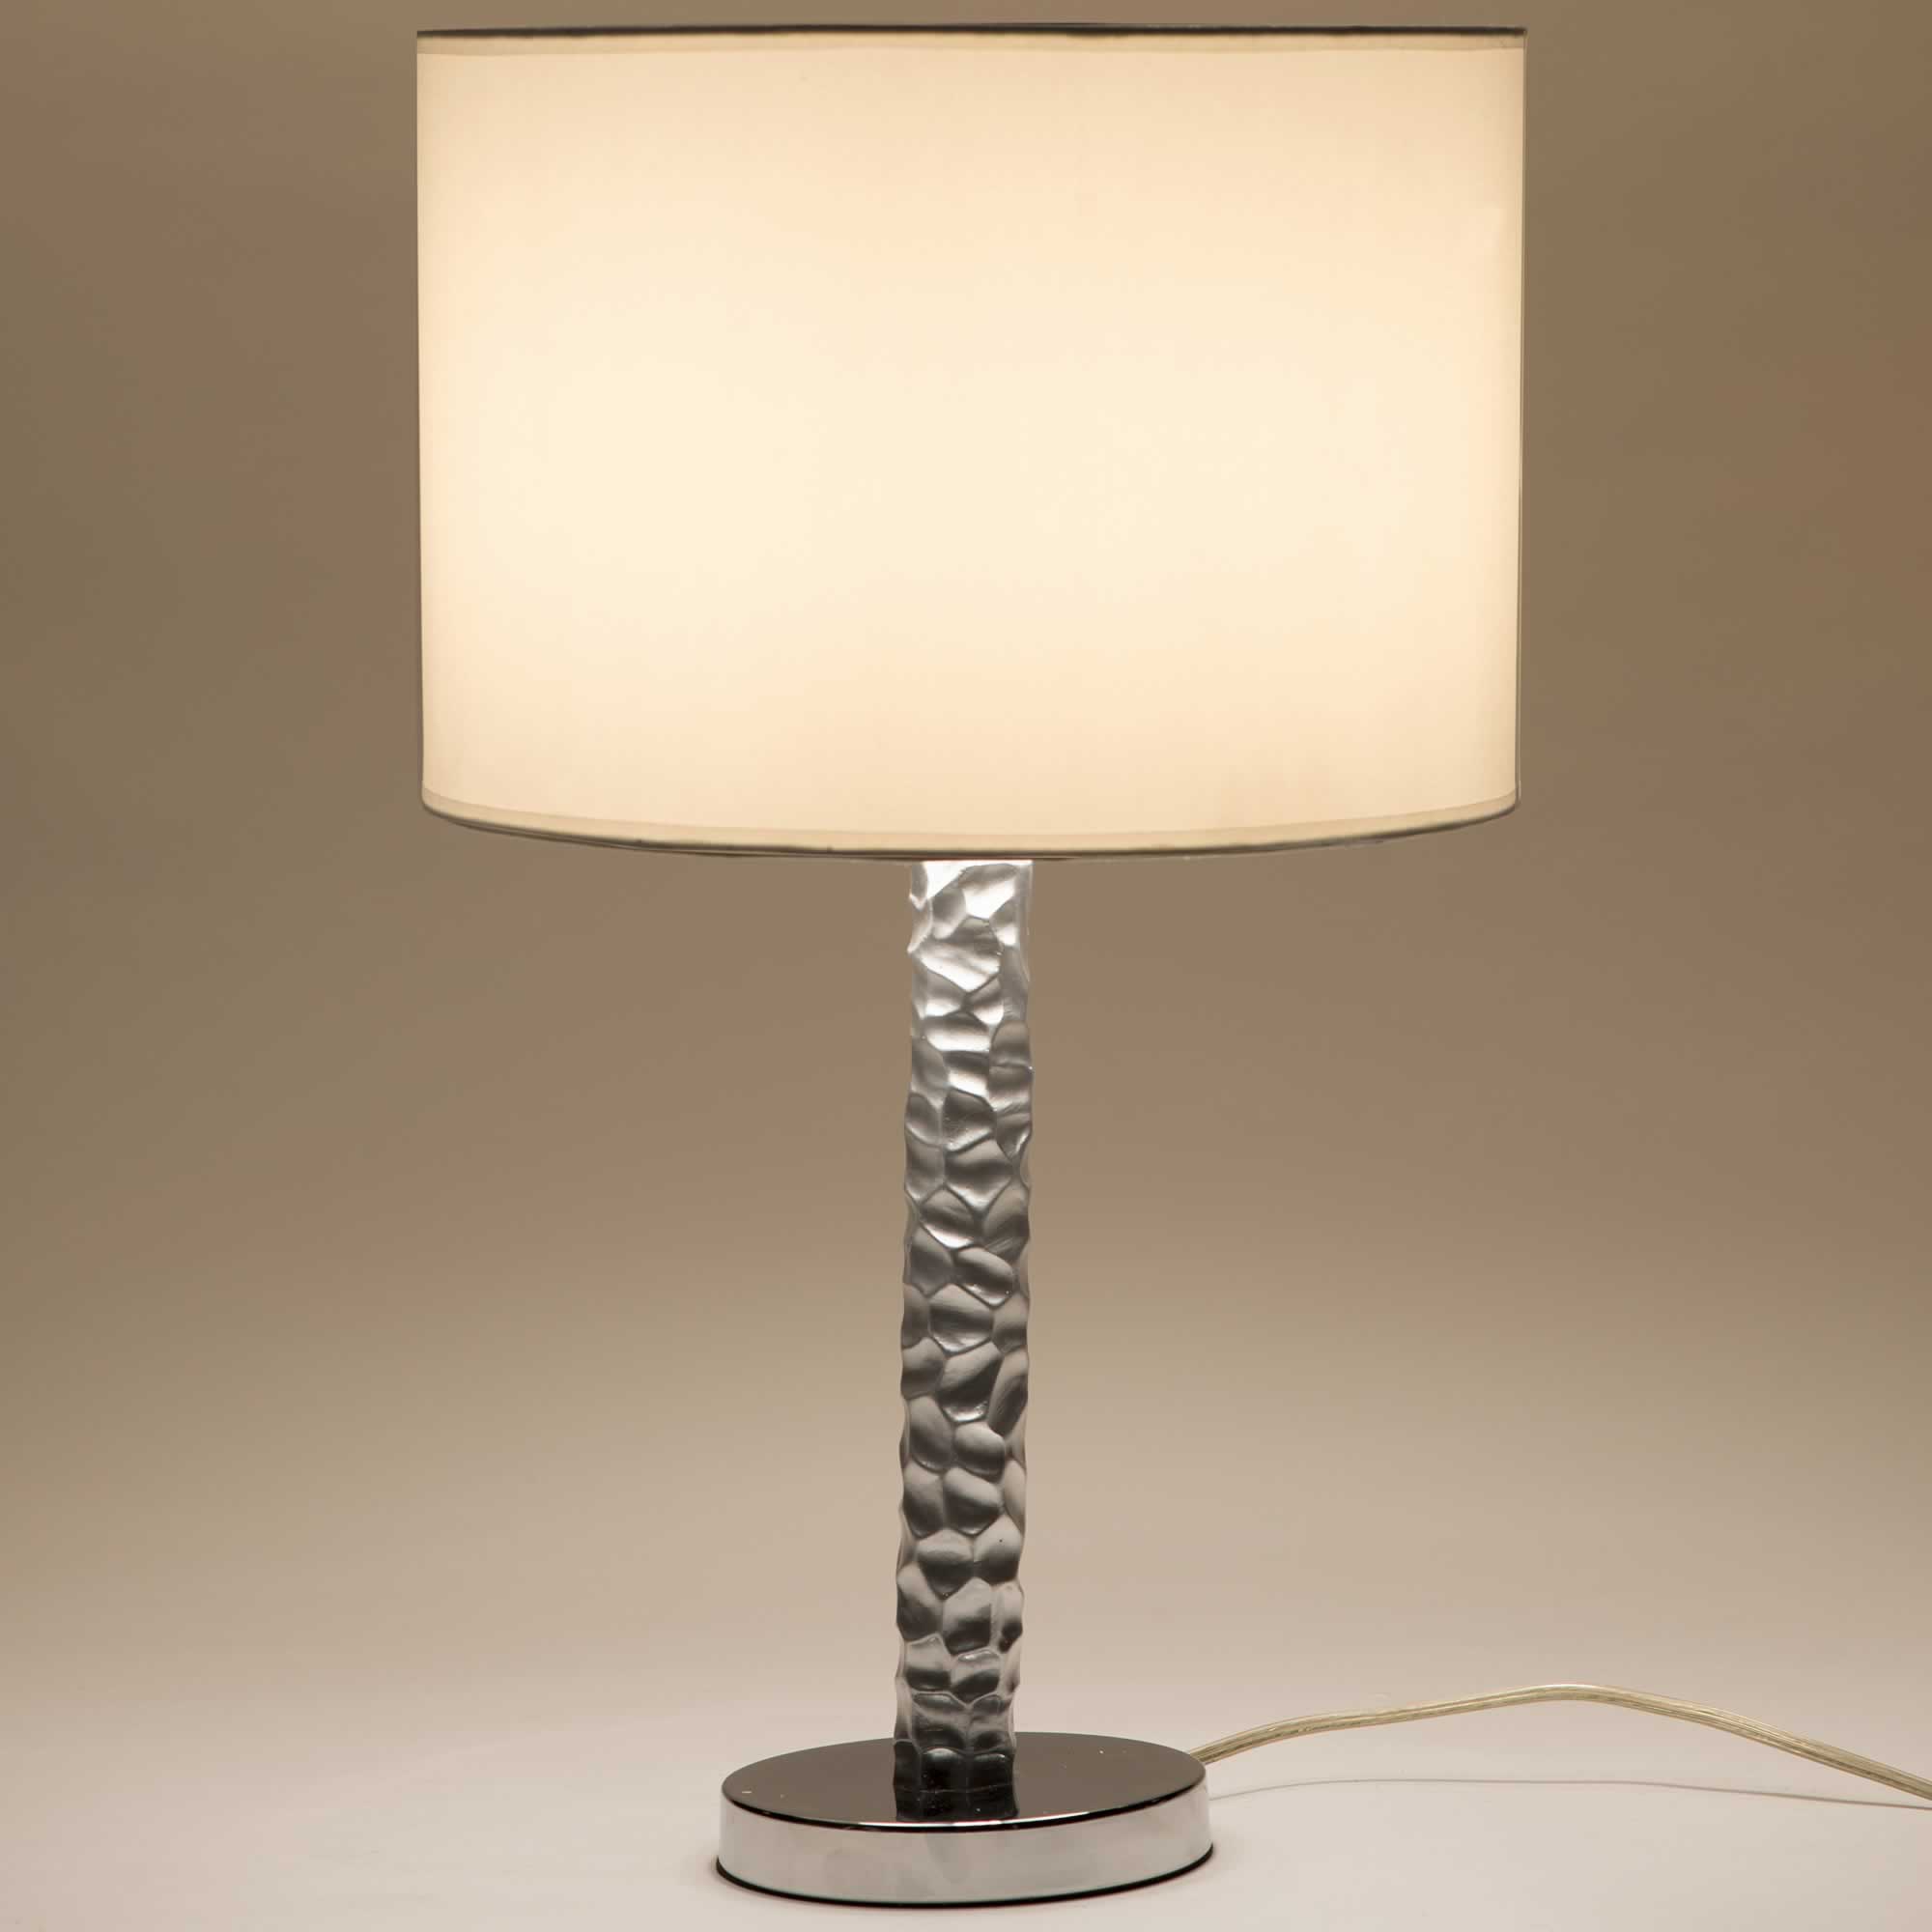 The Silver Core Table Lamp - TL0006